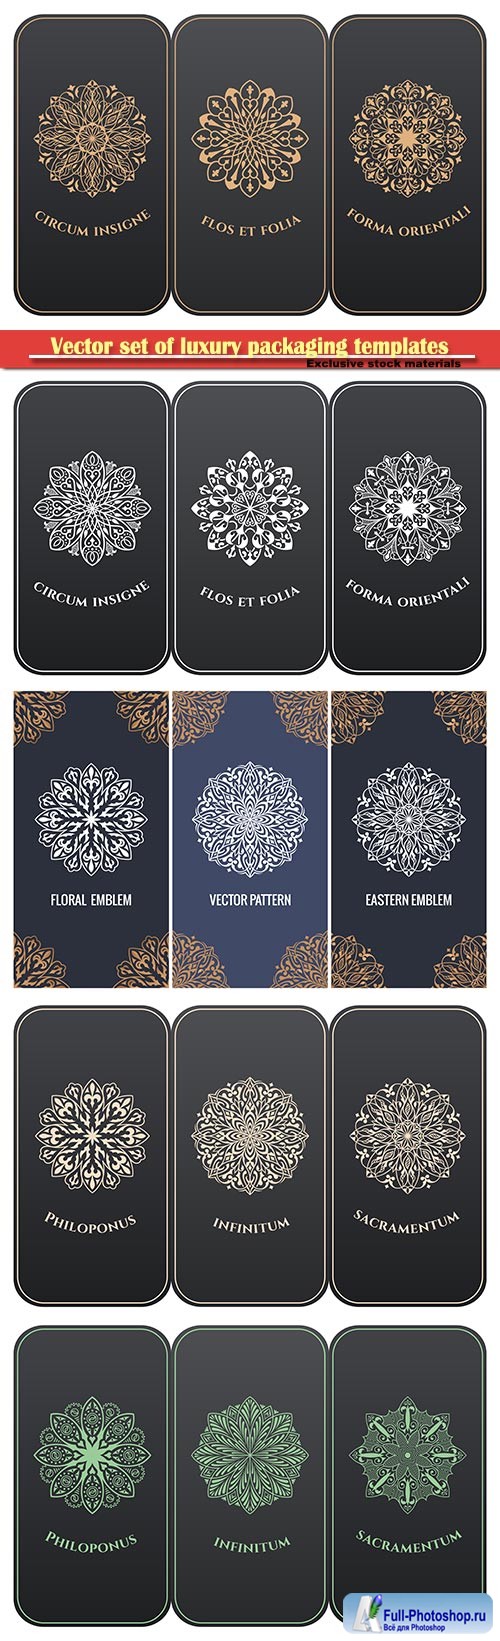 Vector set of luxury packaging templates in modern floral style